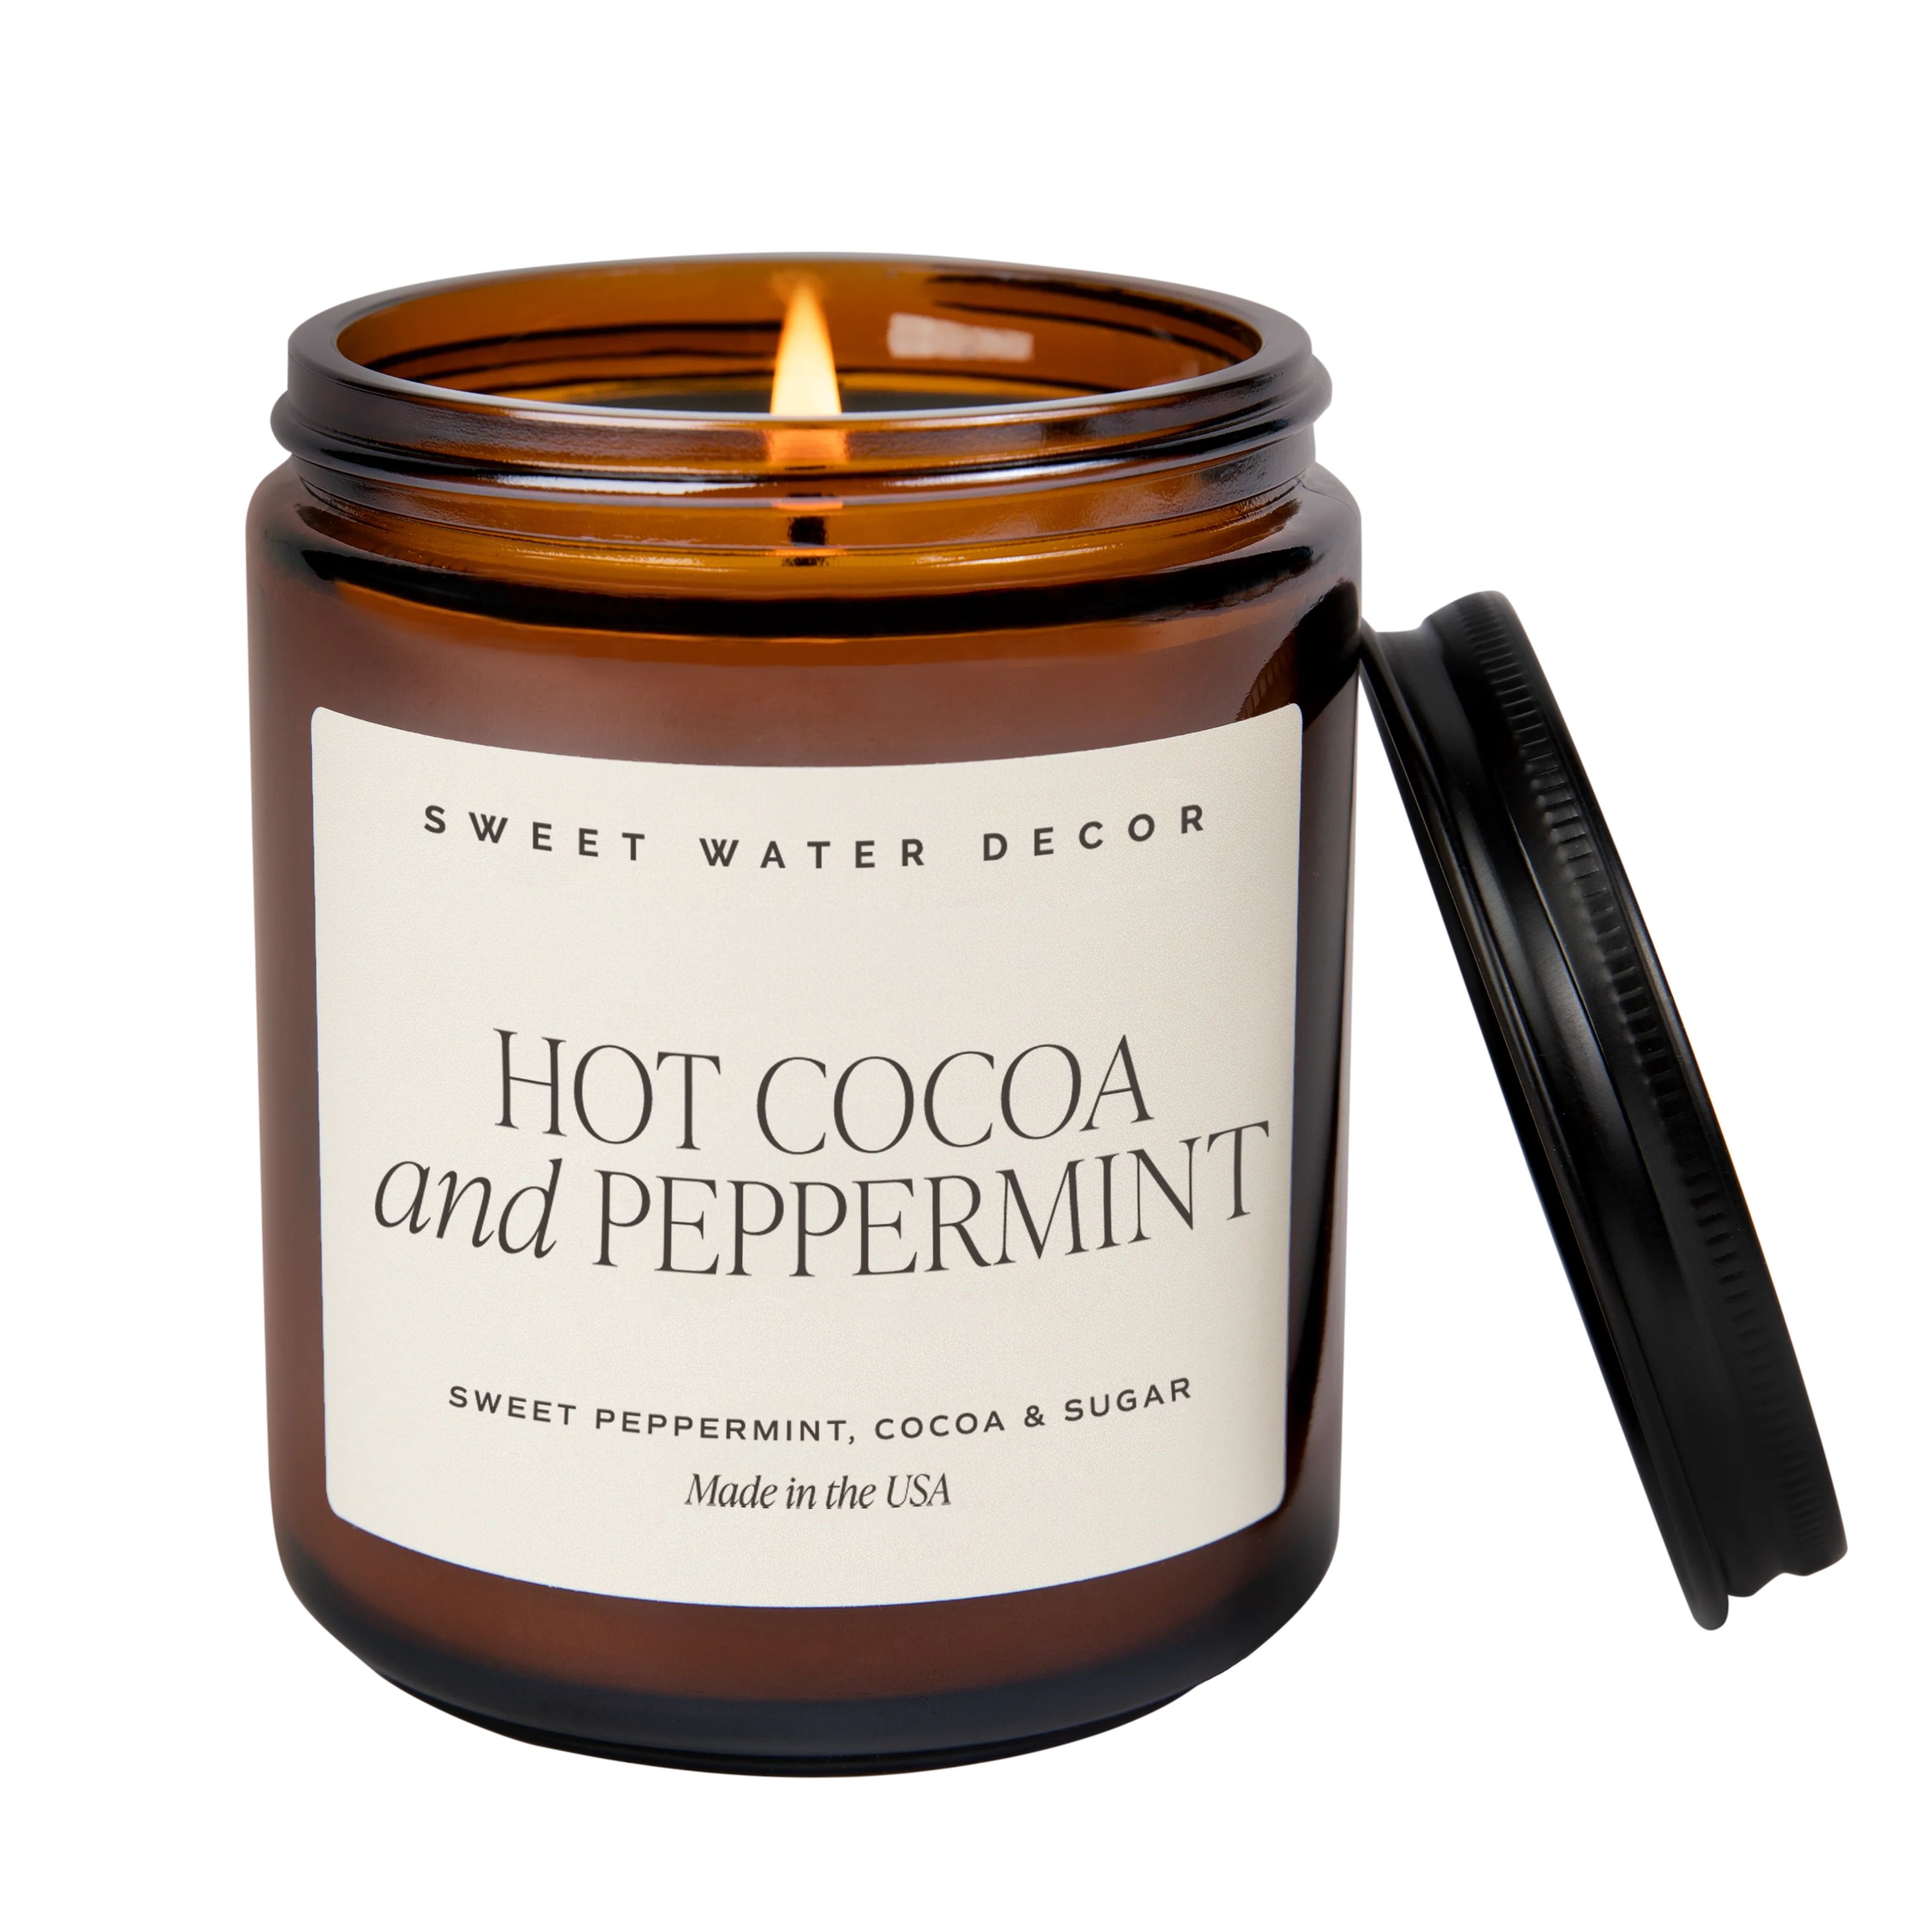 Hot Cocoa and Peppermint Soy Candle - Amber Jar - 9 oz | Sweet Water Decor, LLC